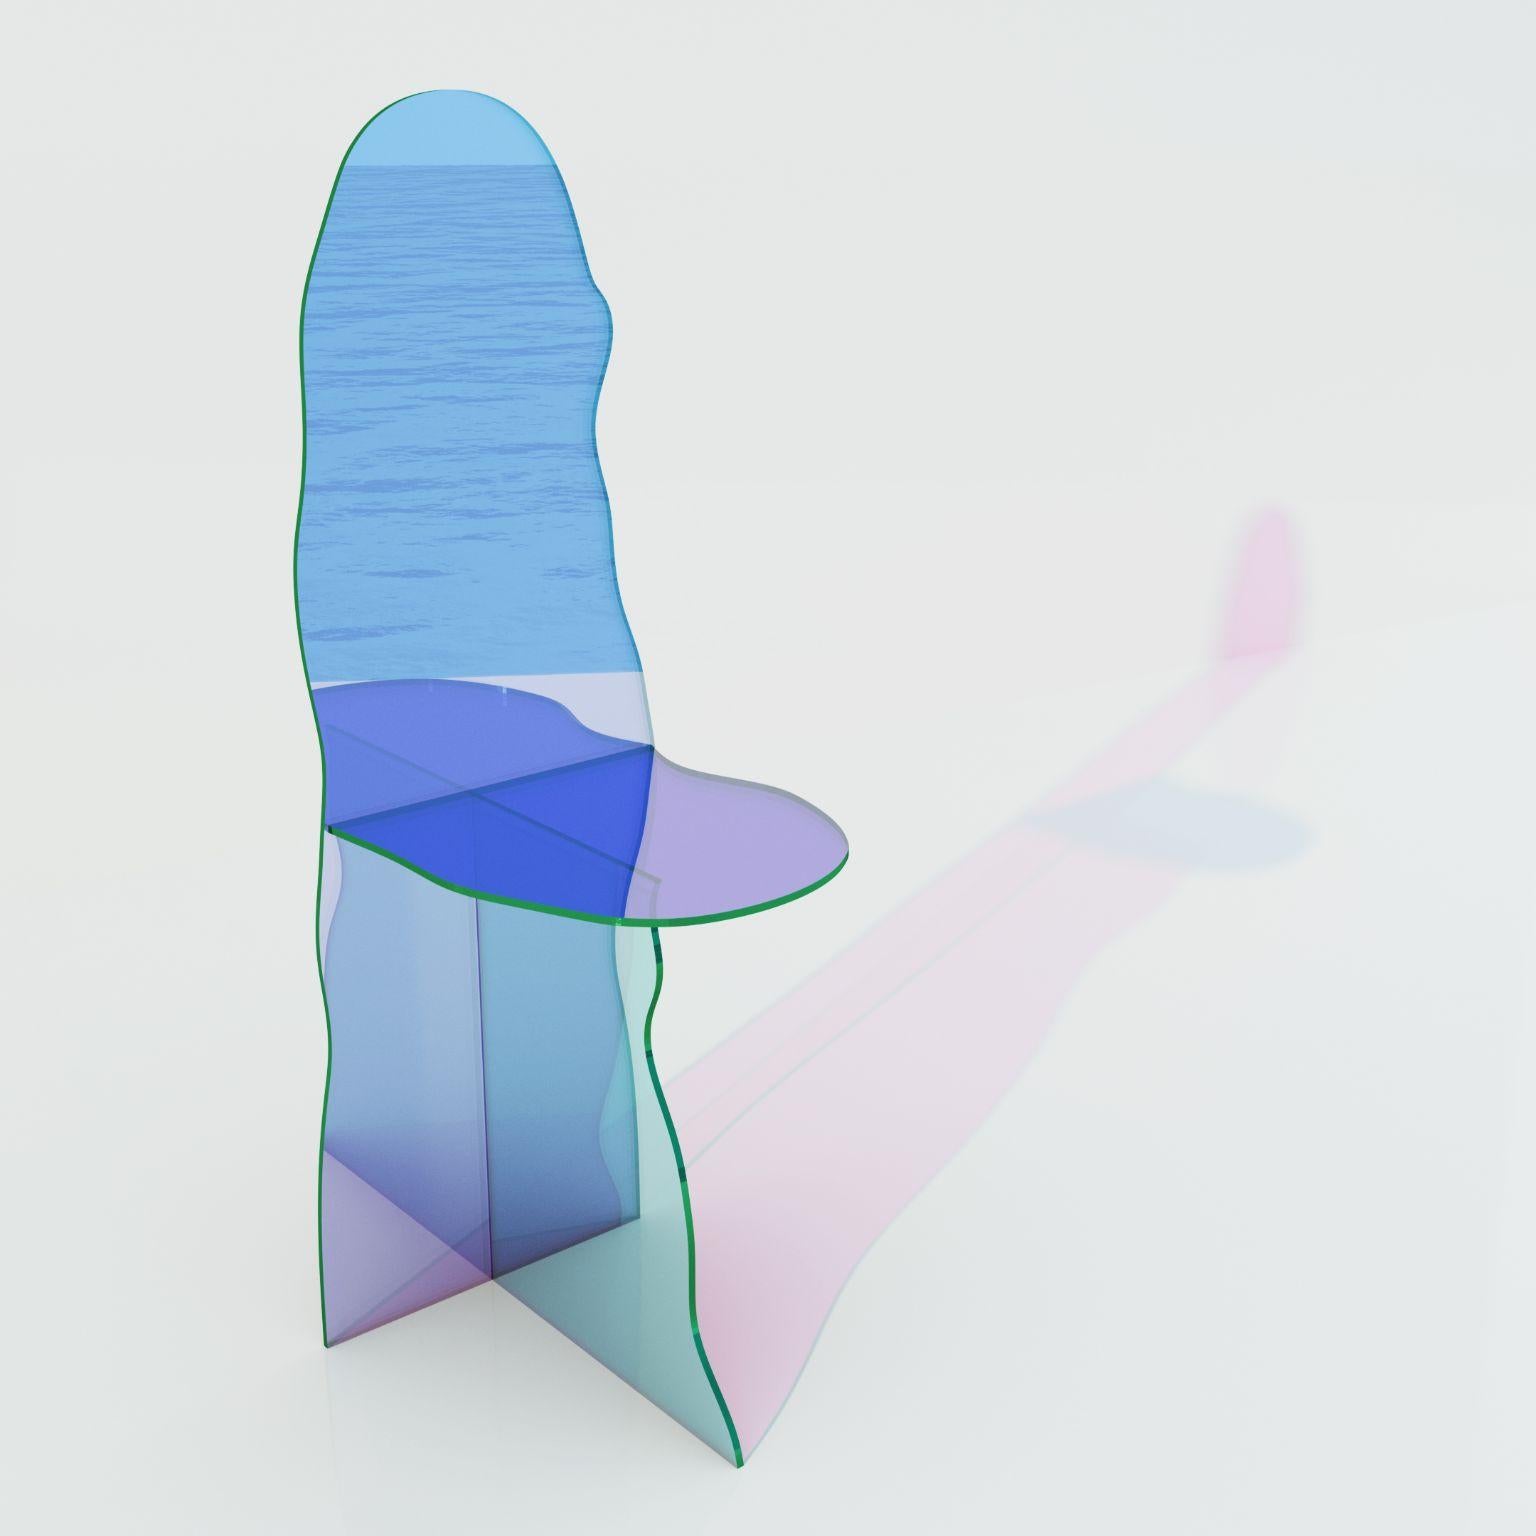 Isola chair by Brajak Vitberg
Dimensions: 43 x 55 x 120 cm
Materials: Dichroic glass

Can be made in Satin glass finish.

Bijelic and Brajak are two architects from Ljubljana, Slovenia.
They are striving to design craft elements and make them